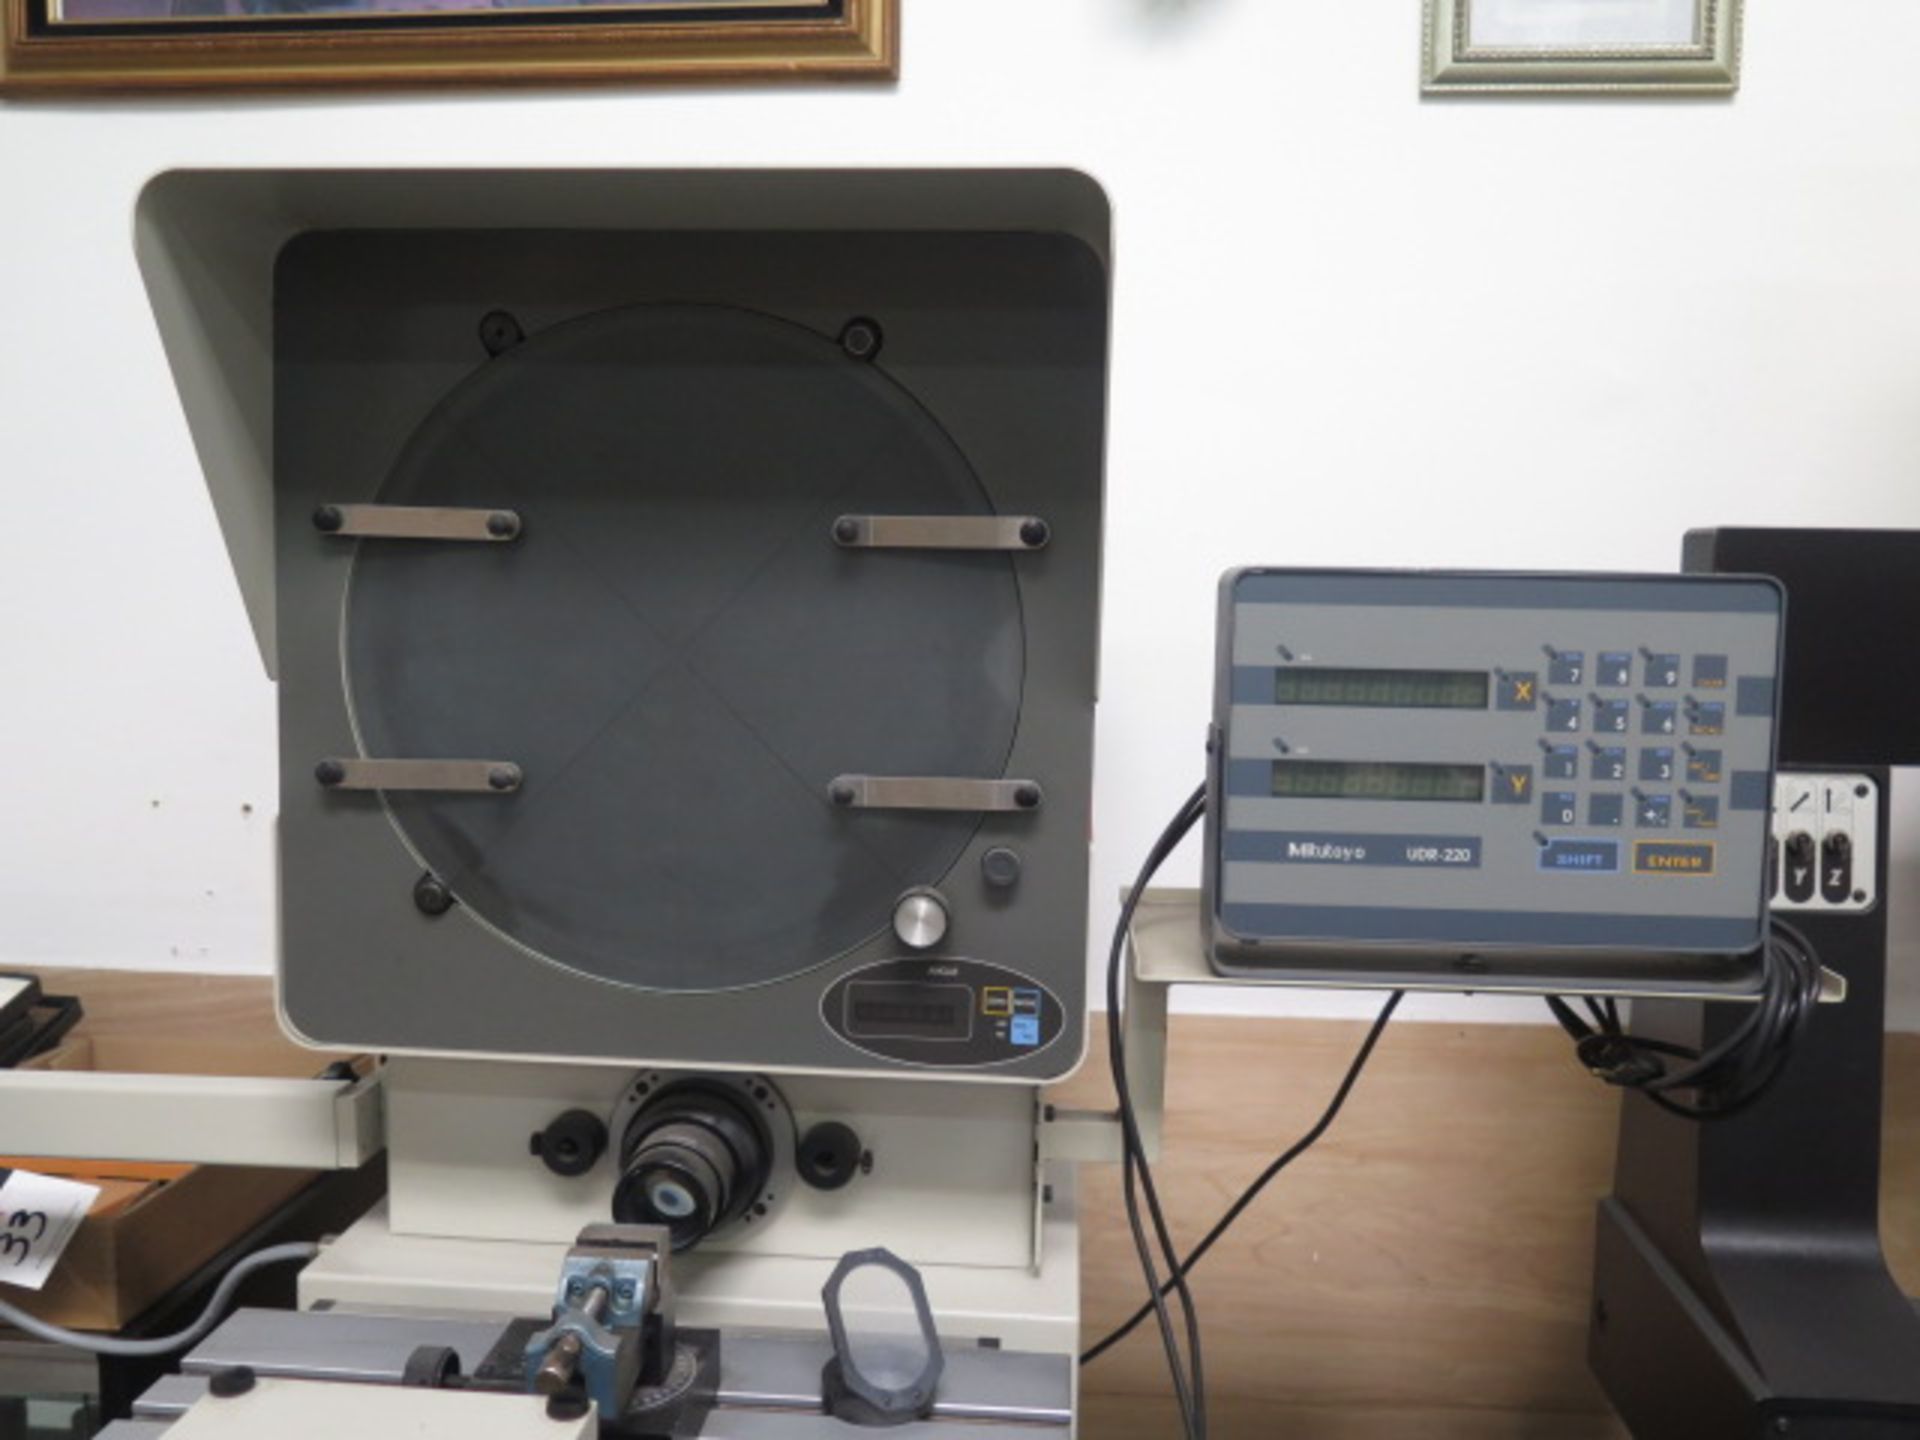 Mitutoyo PH-3500 15” Optical Comparator s/n 750161 w/ Mitutoyo UDR-220 Programmable DRO, Digital - Image 3 of 13